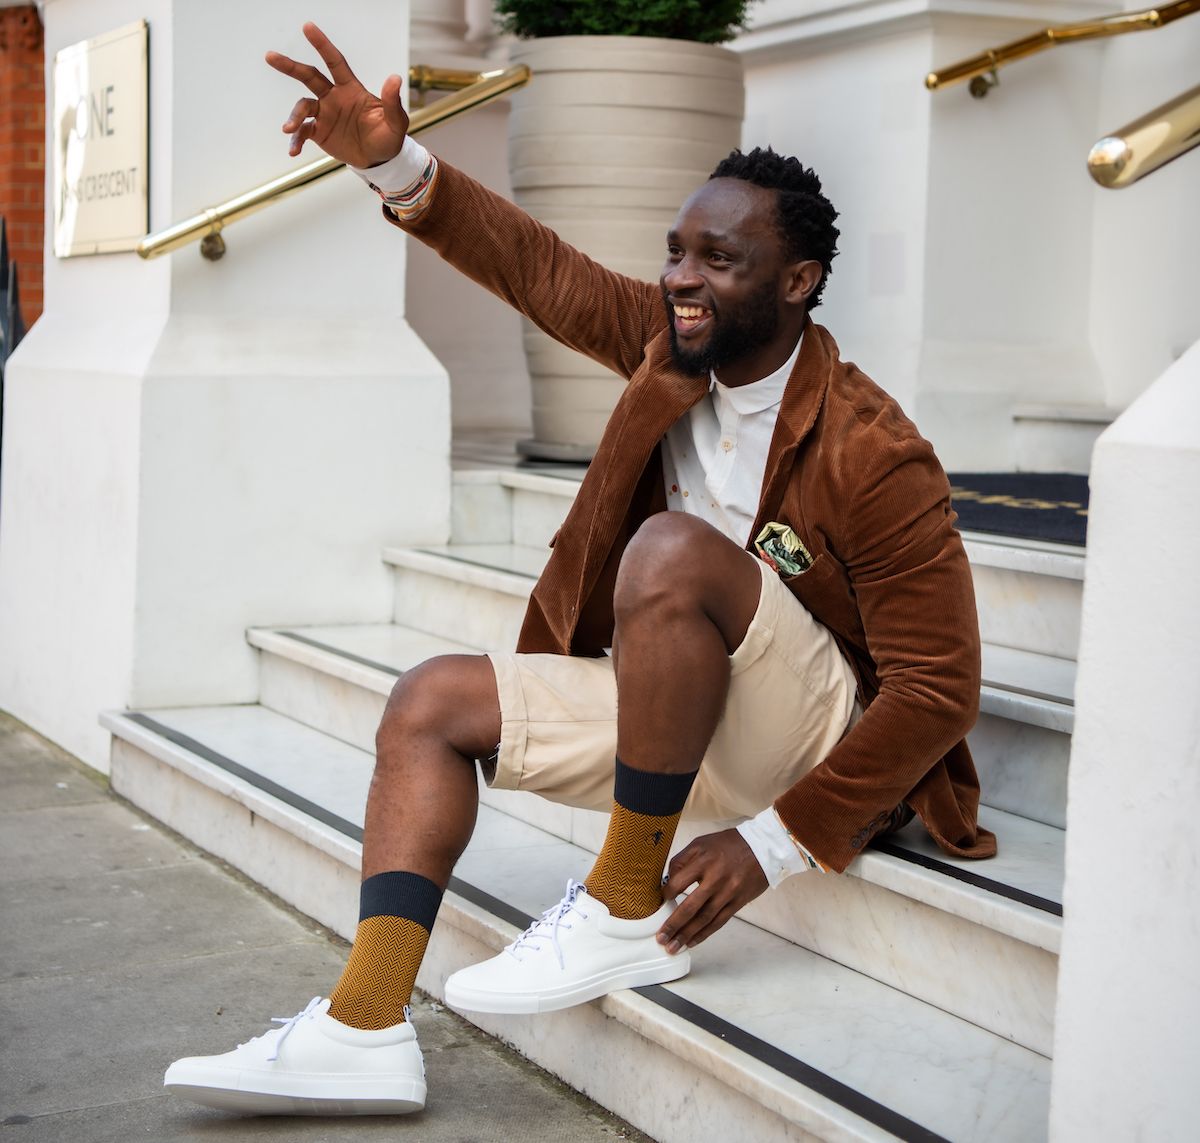 Men's Style Tips: White Trainers and Colourful Socks - London Sock